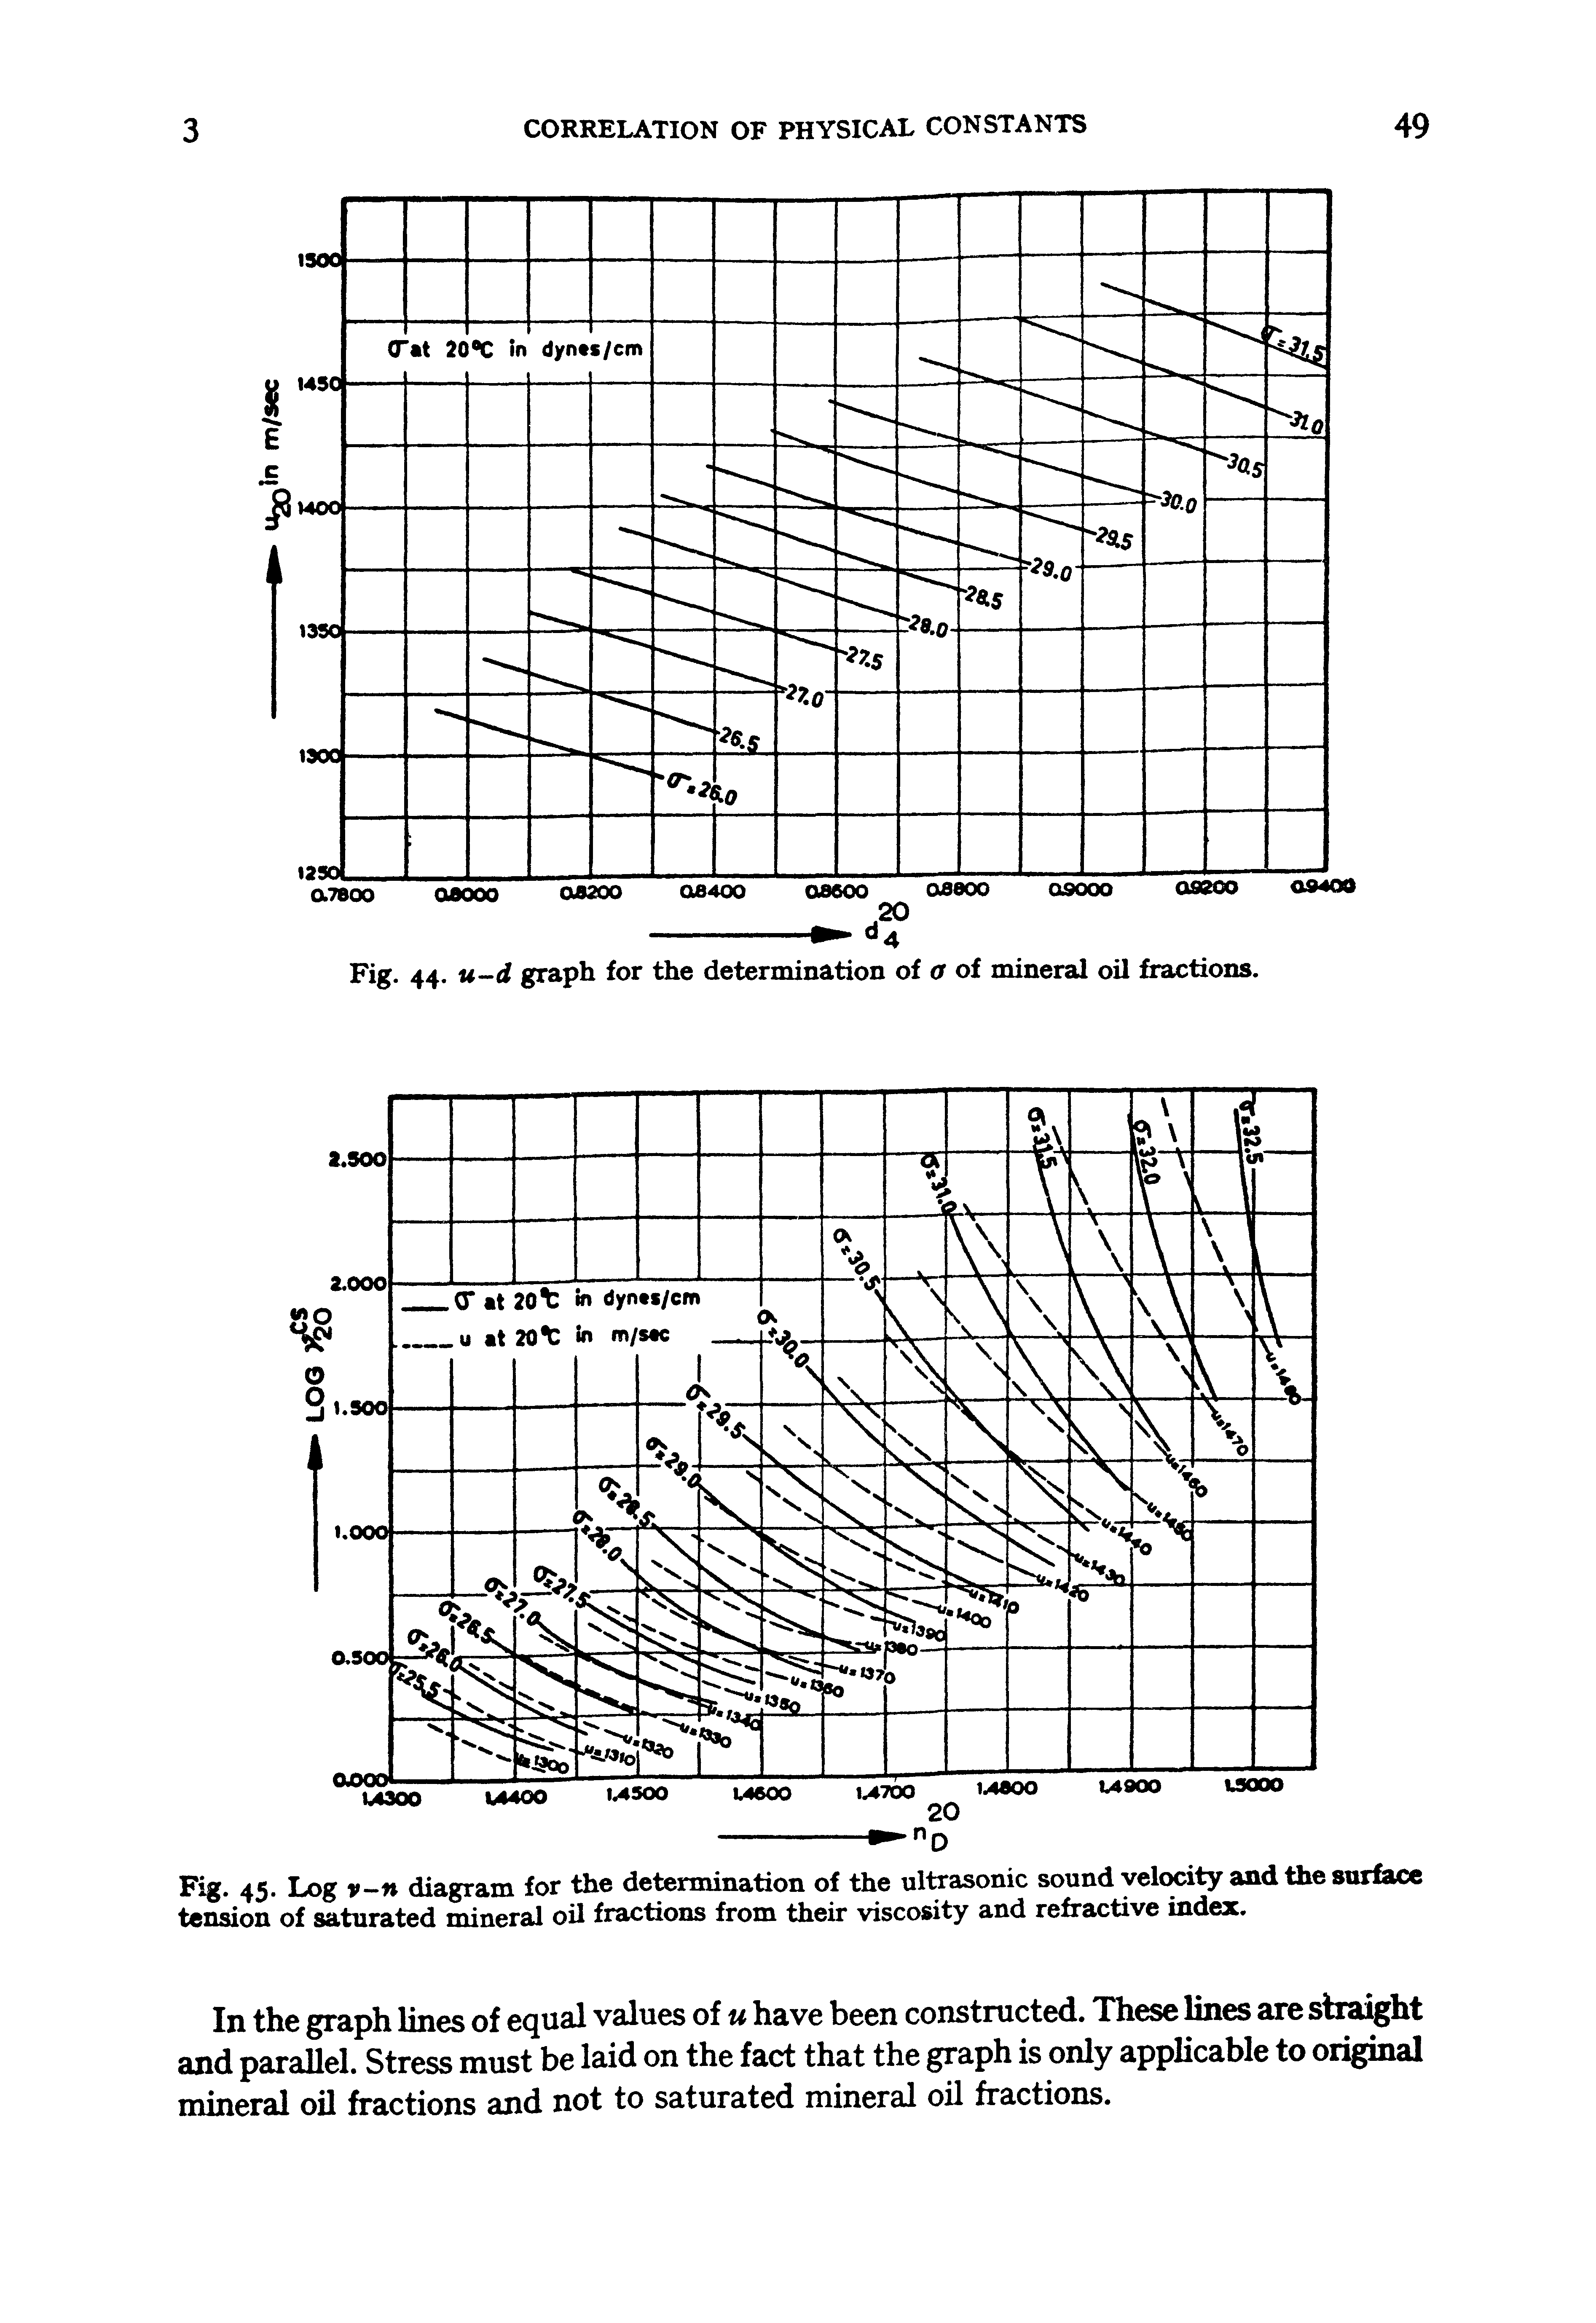 Fig. 45. Log v-n diagram for the determination of the ultrasonic sound velocity and the surface tension of saturated mineral oil fractions from their viscosity and refractive index.